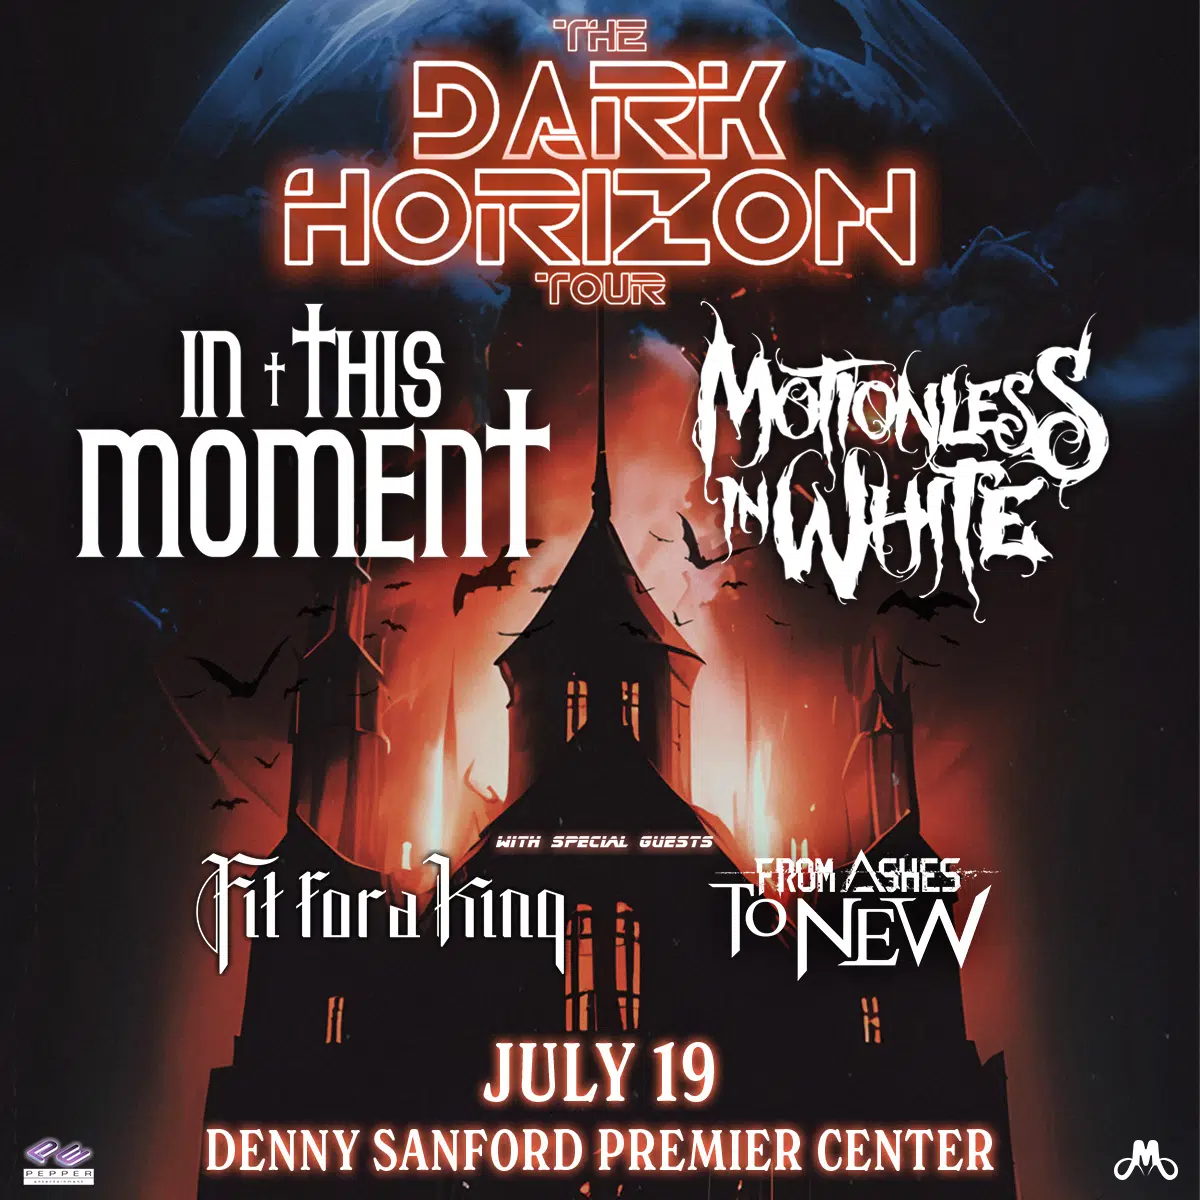 Dark Horizons Tour In This Moment & Motionless In White 103.7 The KRRO